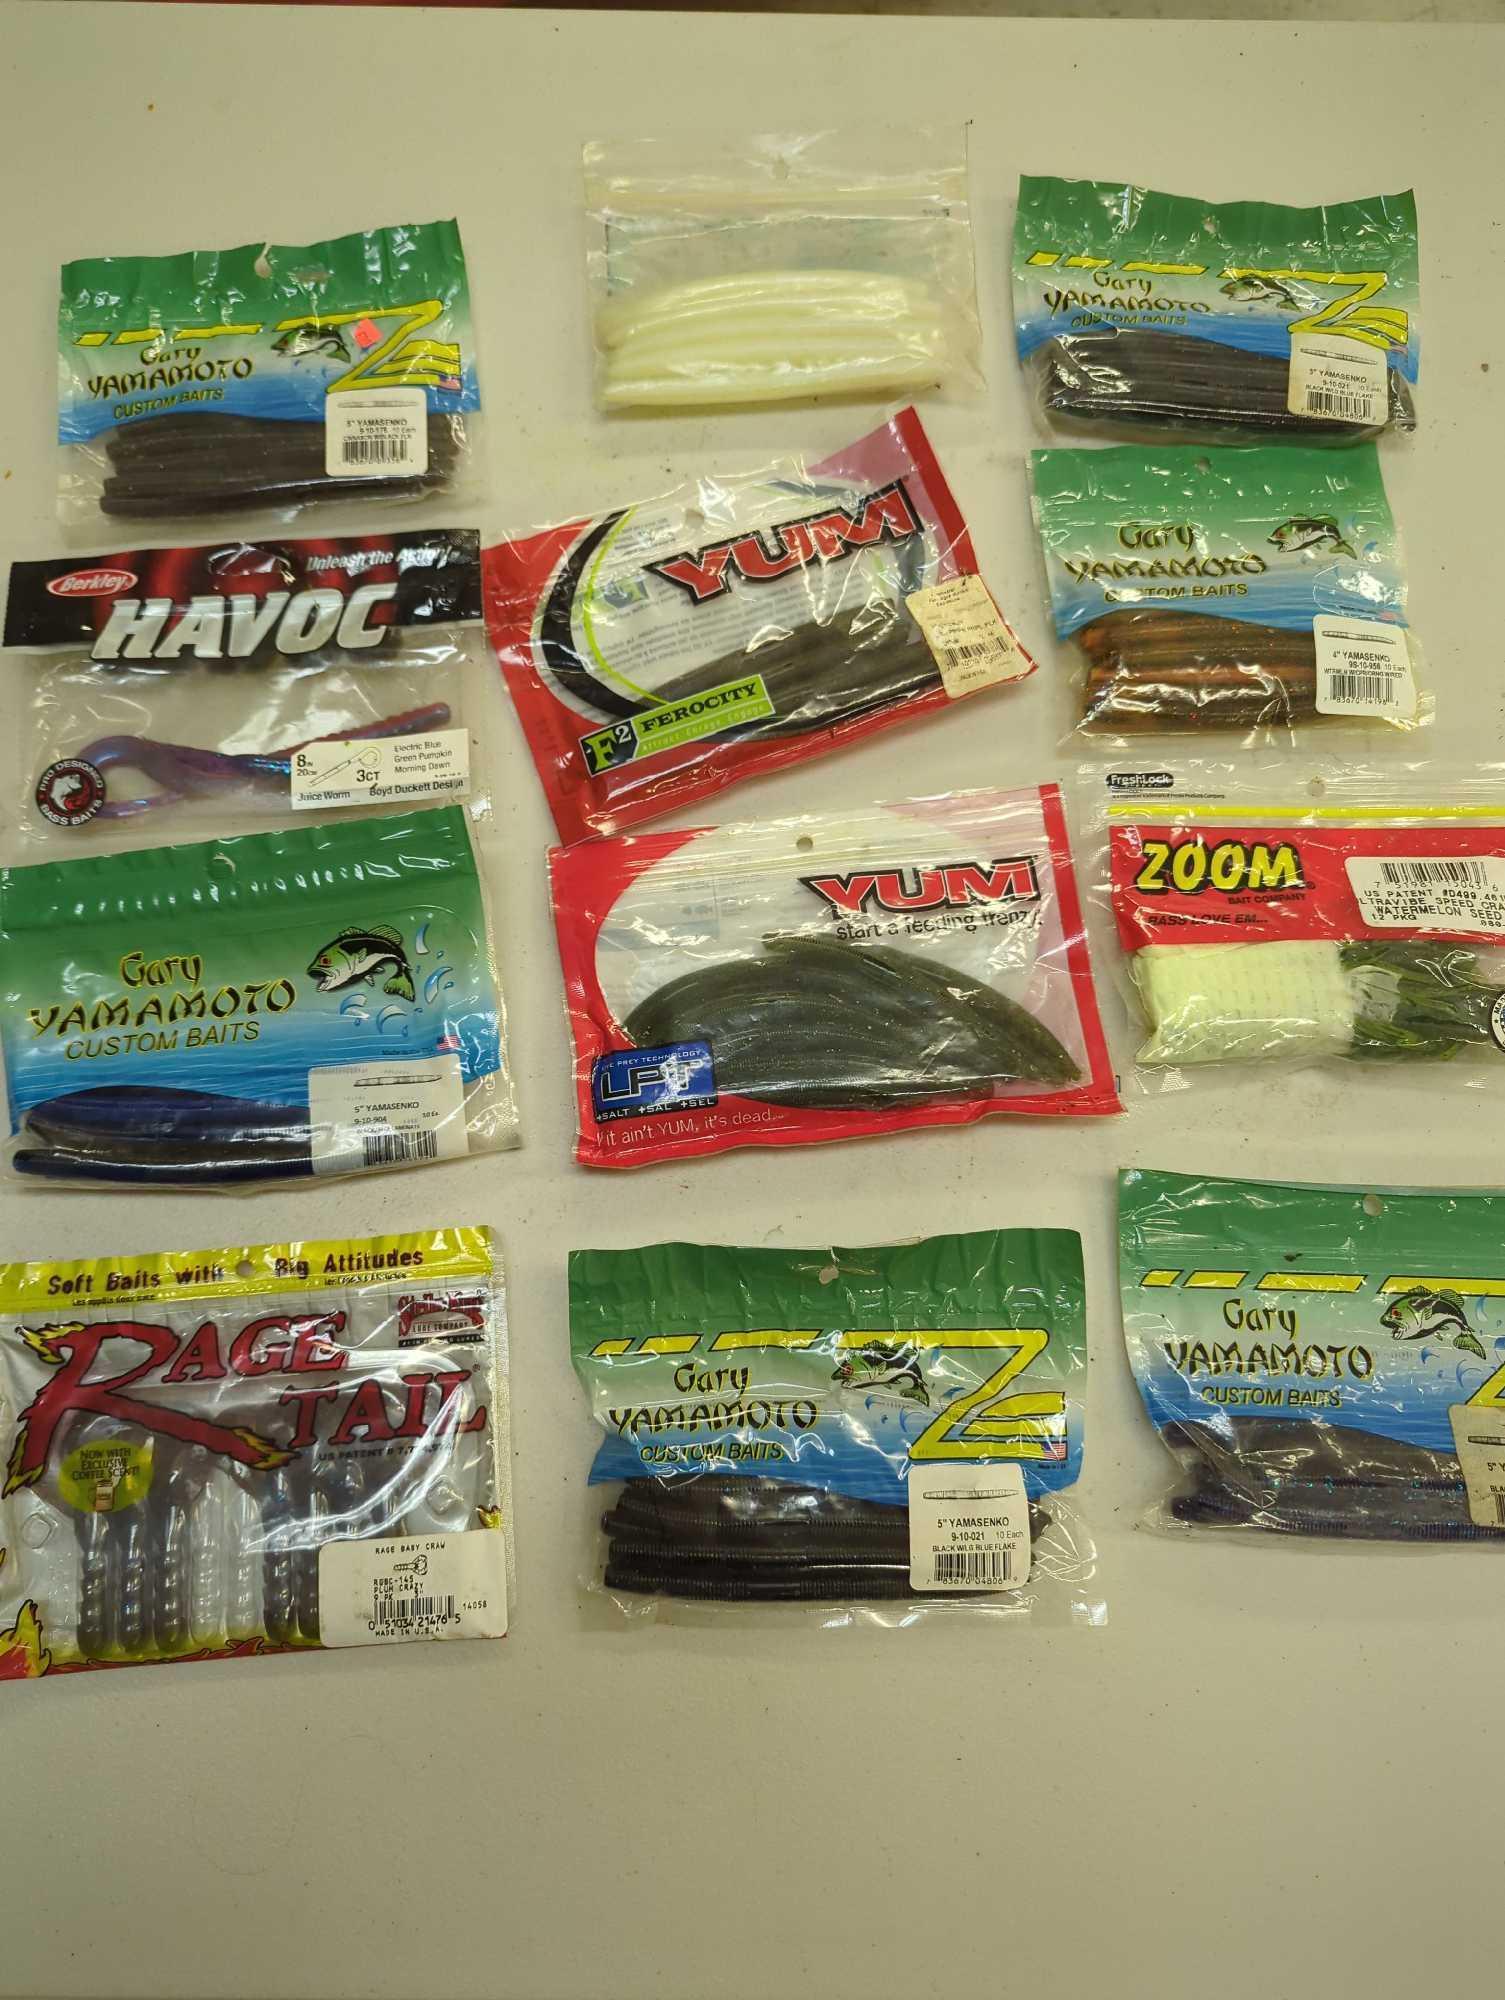 Aqua Sterilite stackable storage crate and contents including various worm fishing lures. Comes as